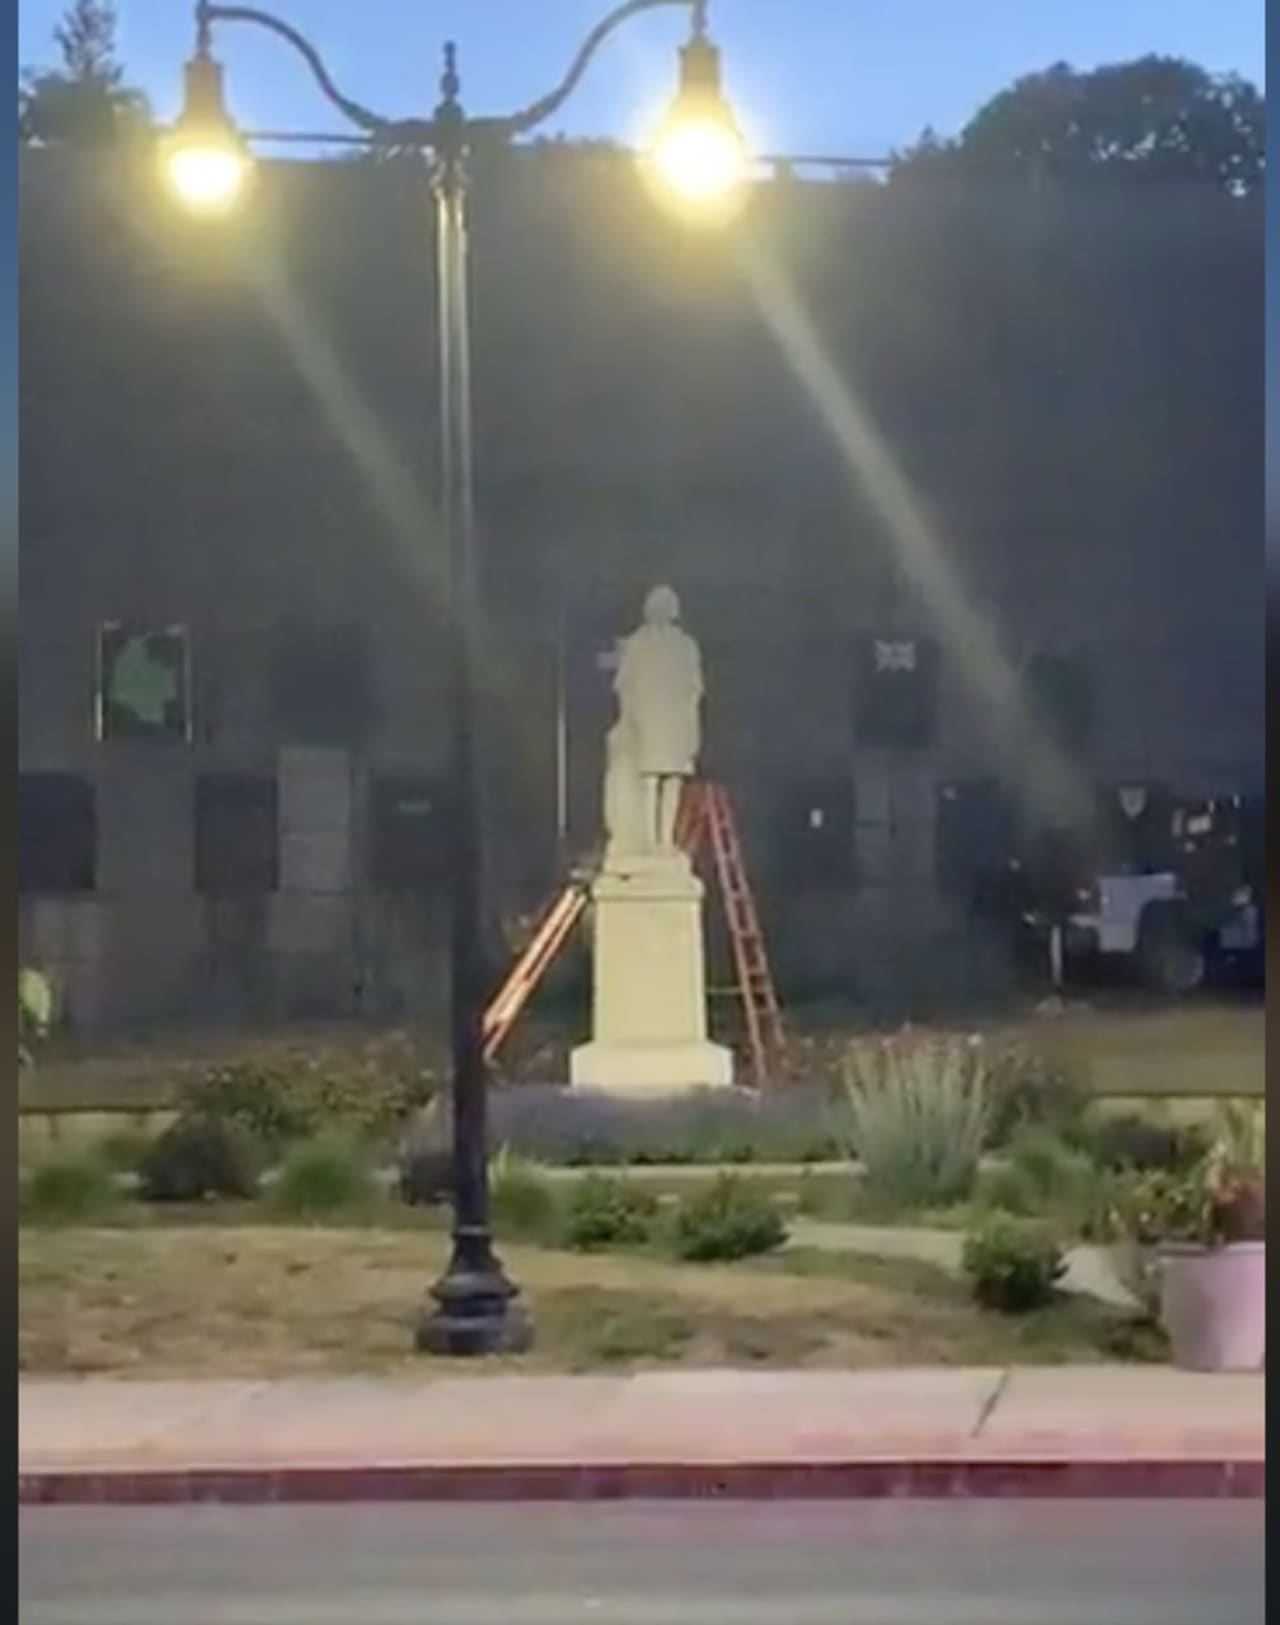 Workers set-up to remove the Christopher Columbus statue in Norwalk.